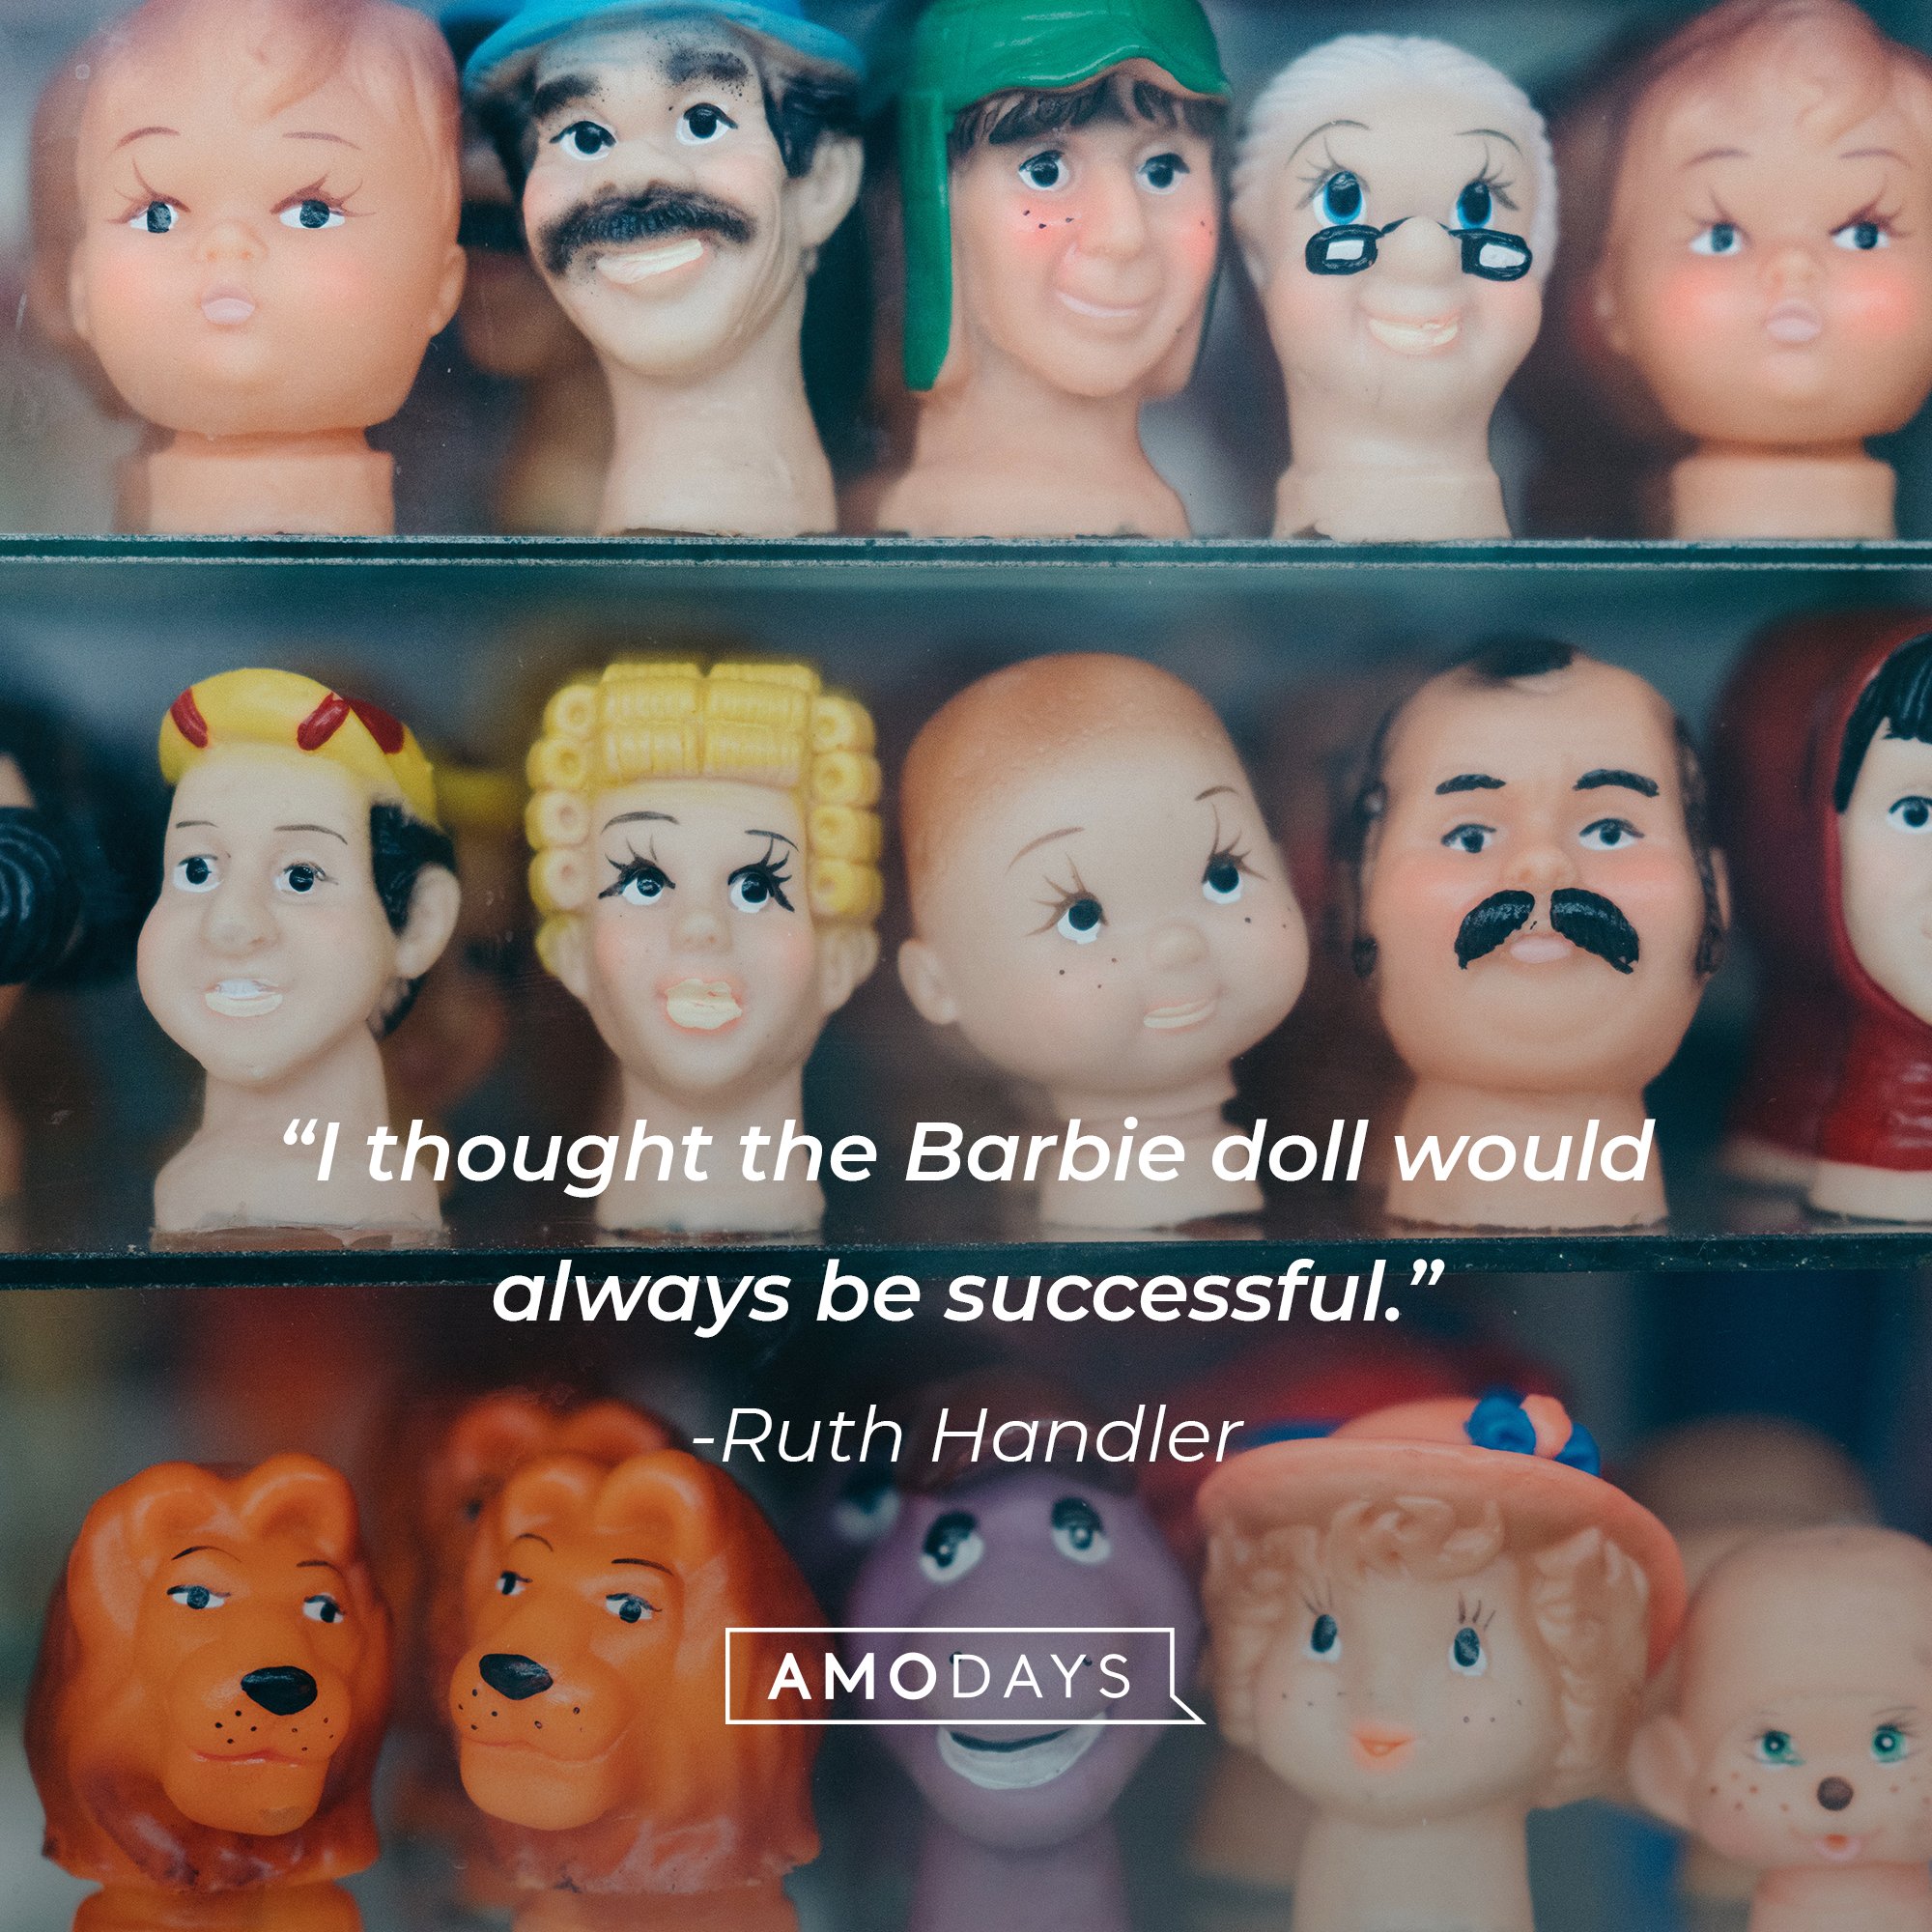 Ruth Handler's quote: "I thought the Barbie doll would always be successful." | Image: AmoDays